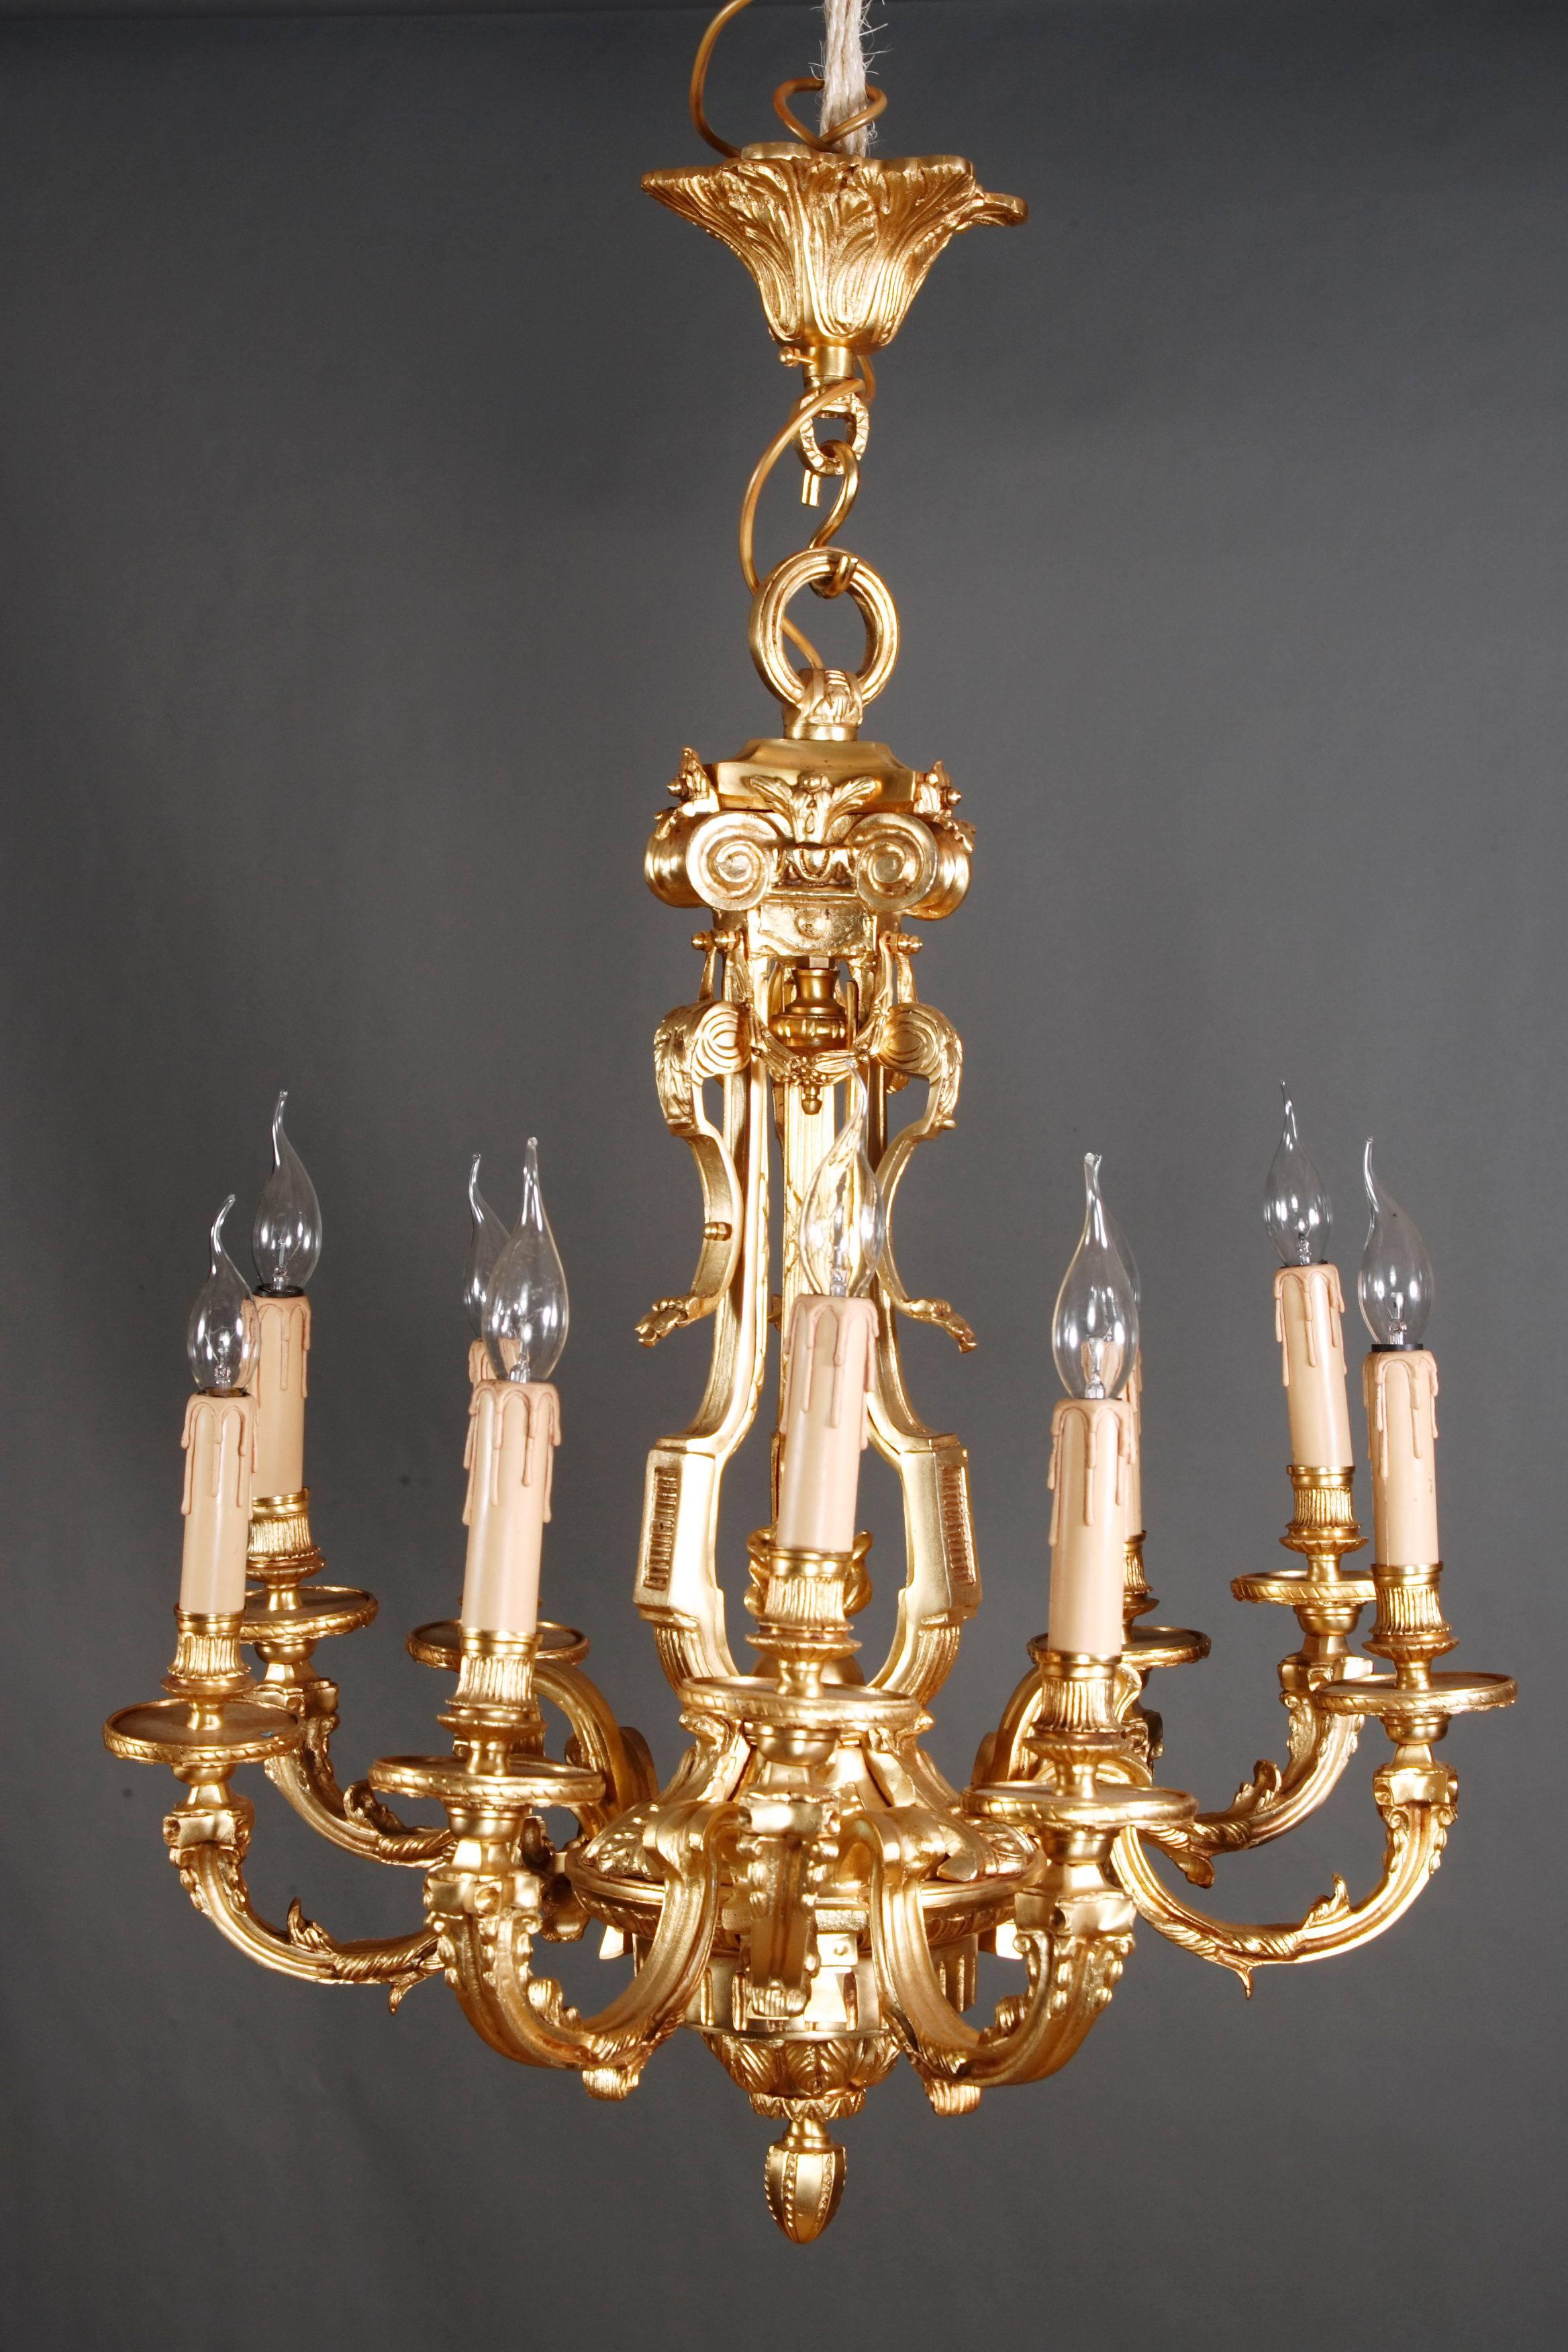 French chandelier in Louis XIV style.
Solid, engraved brass. Nine curved light arms.

(F-Kan-4).